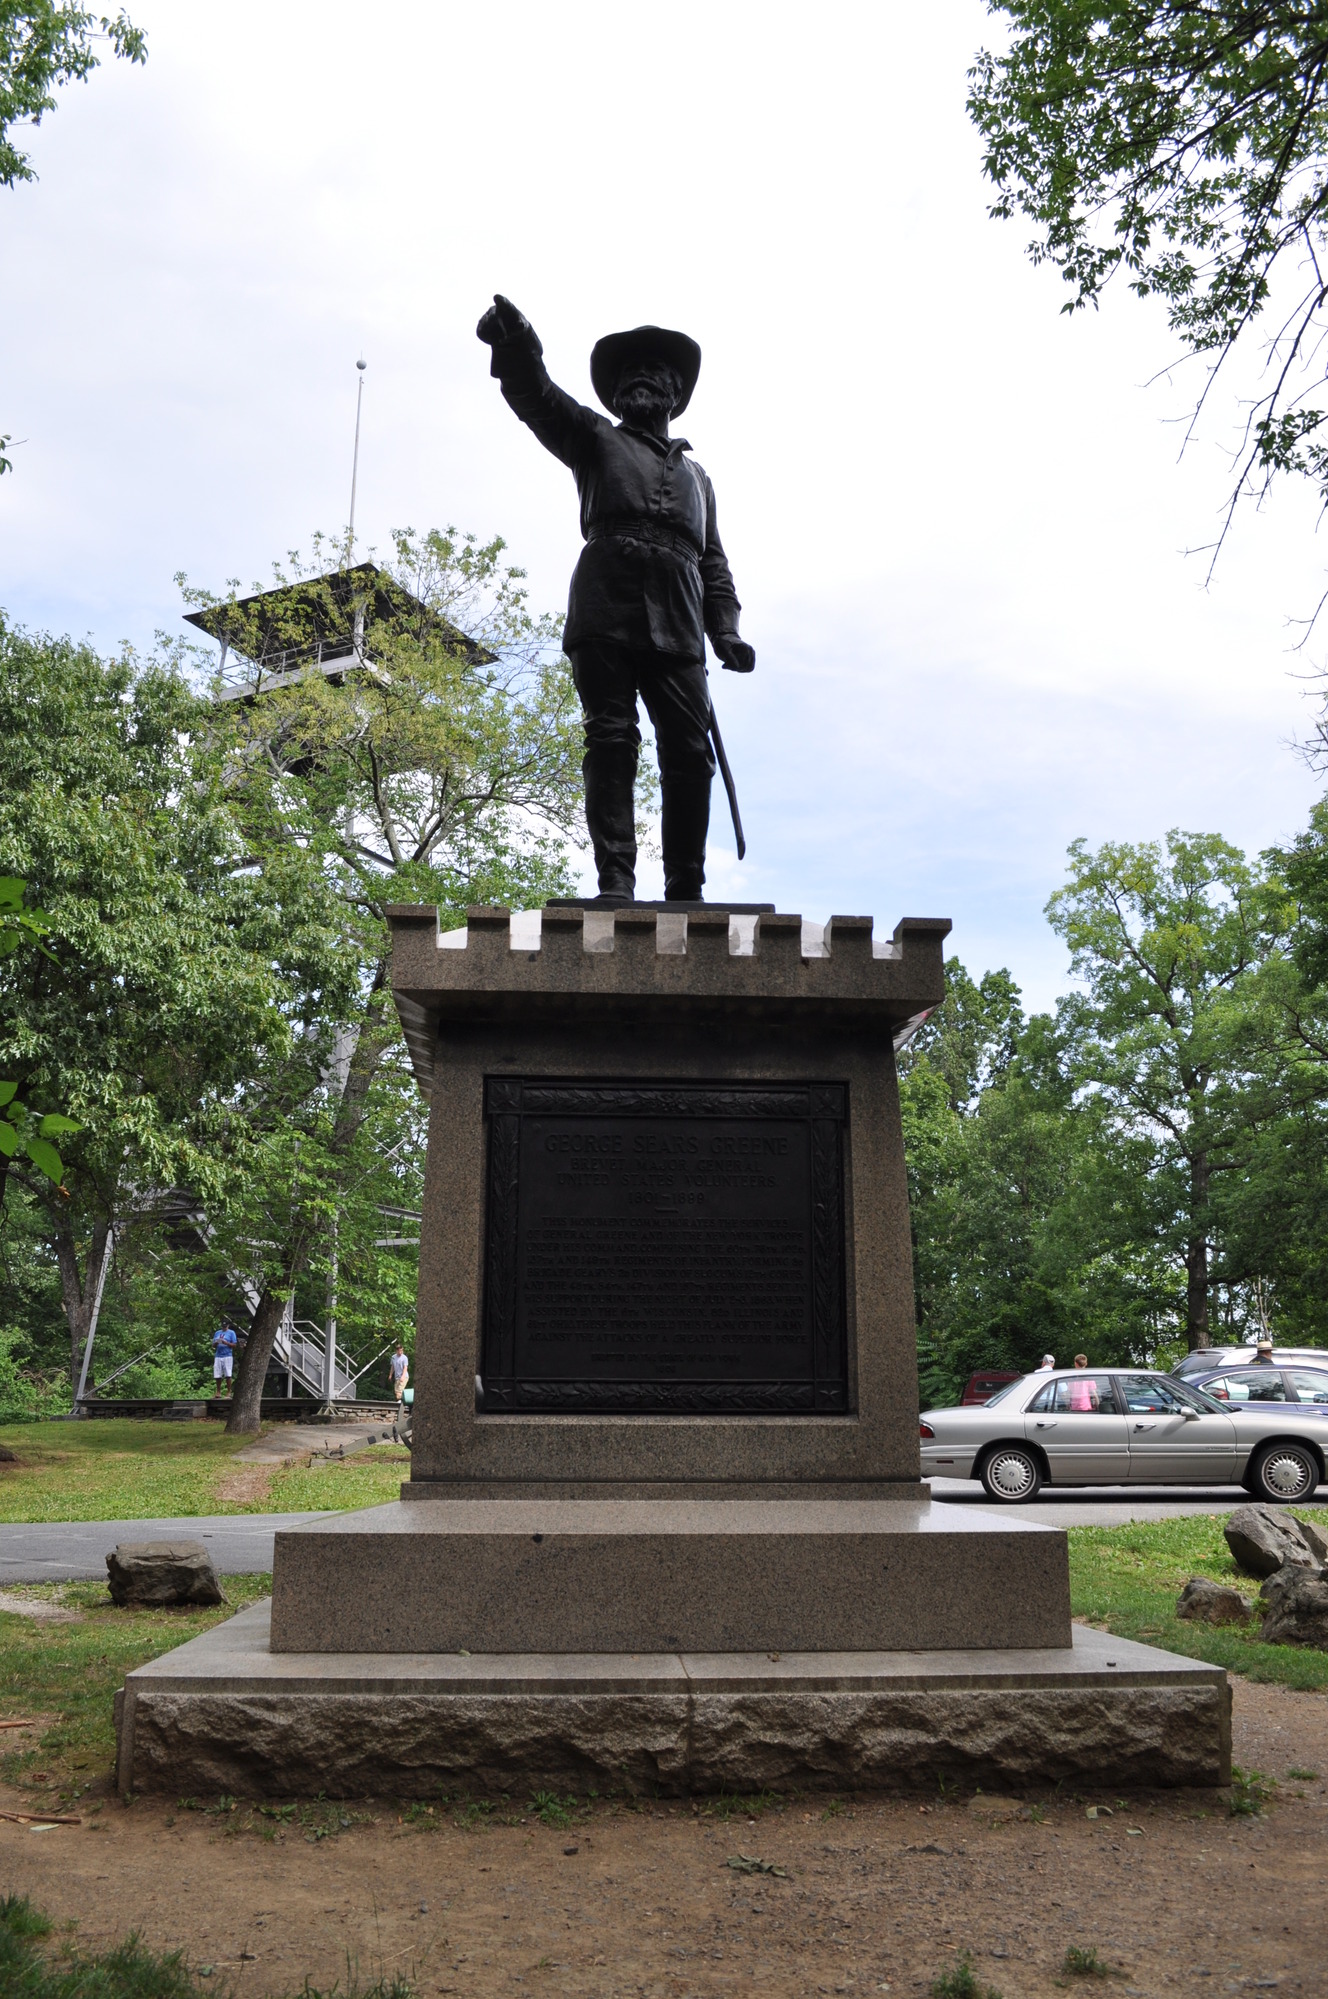 Statue of a man with hat and sword extending his right arm to point, atop a rectangular pedestal. Trees, a tall watchtower, and parking lot in the background.